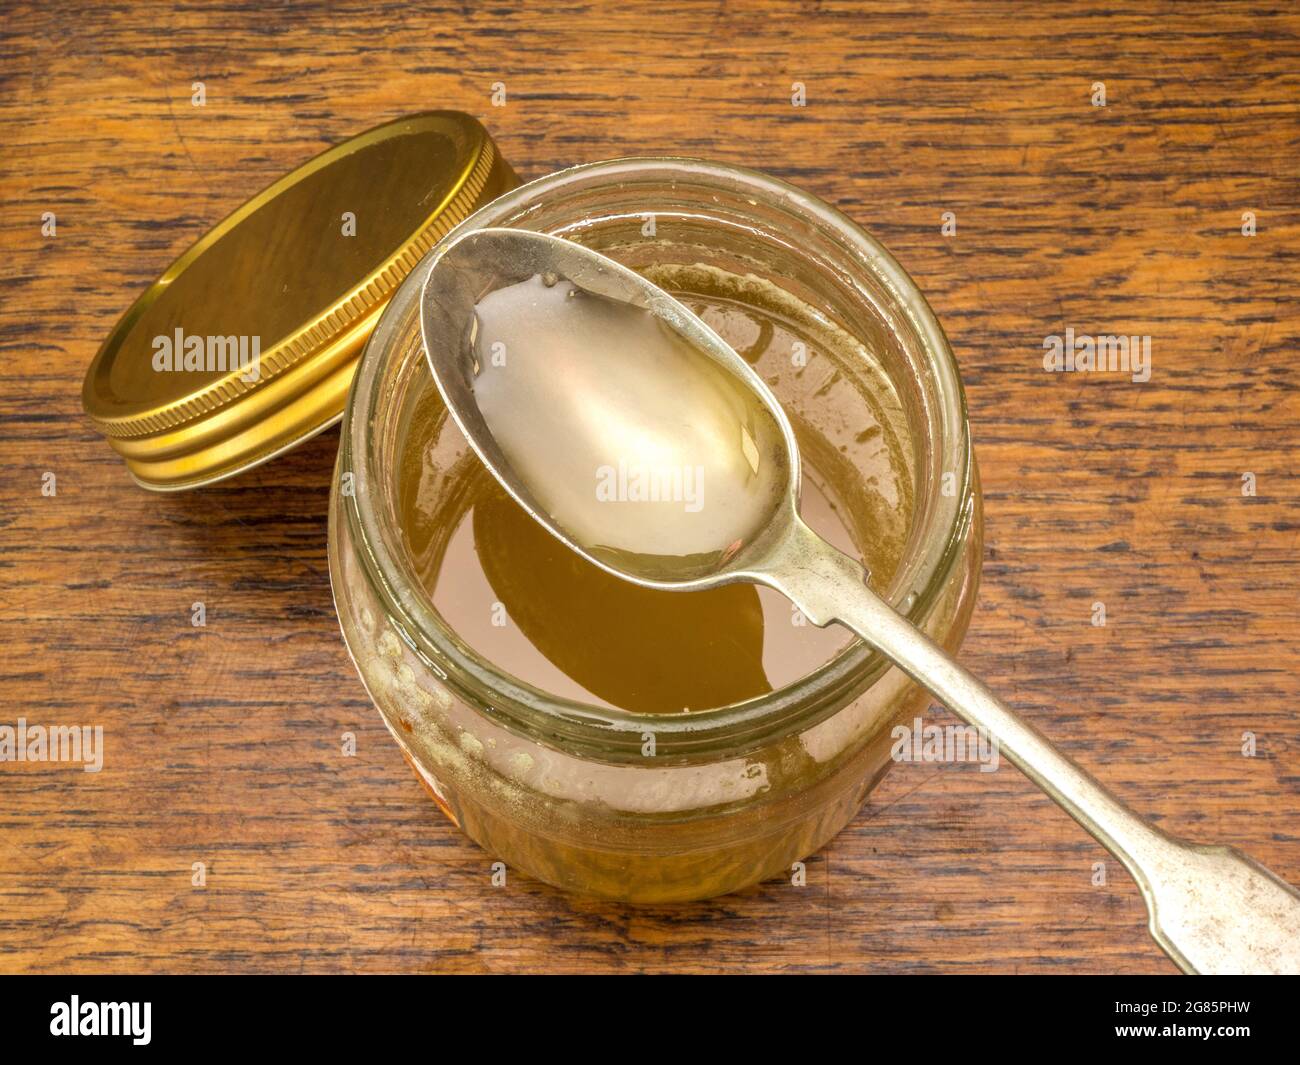 Closeup overhead view of a spoonful of thick pure bee honey resting on the top of an open product jar, standing on a wooden table. Stock Photo